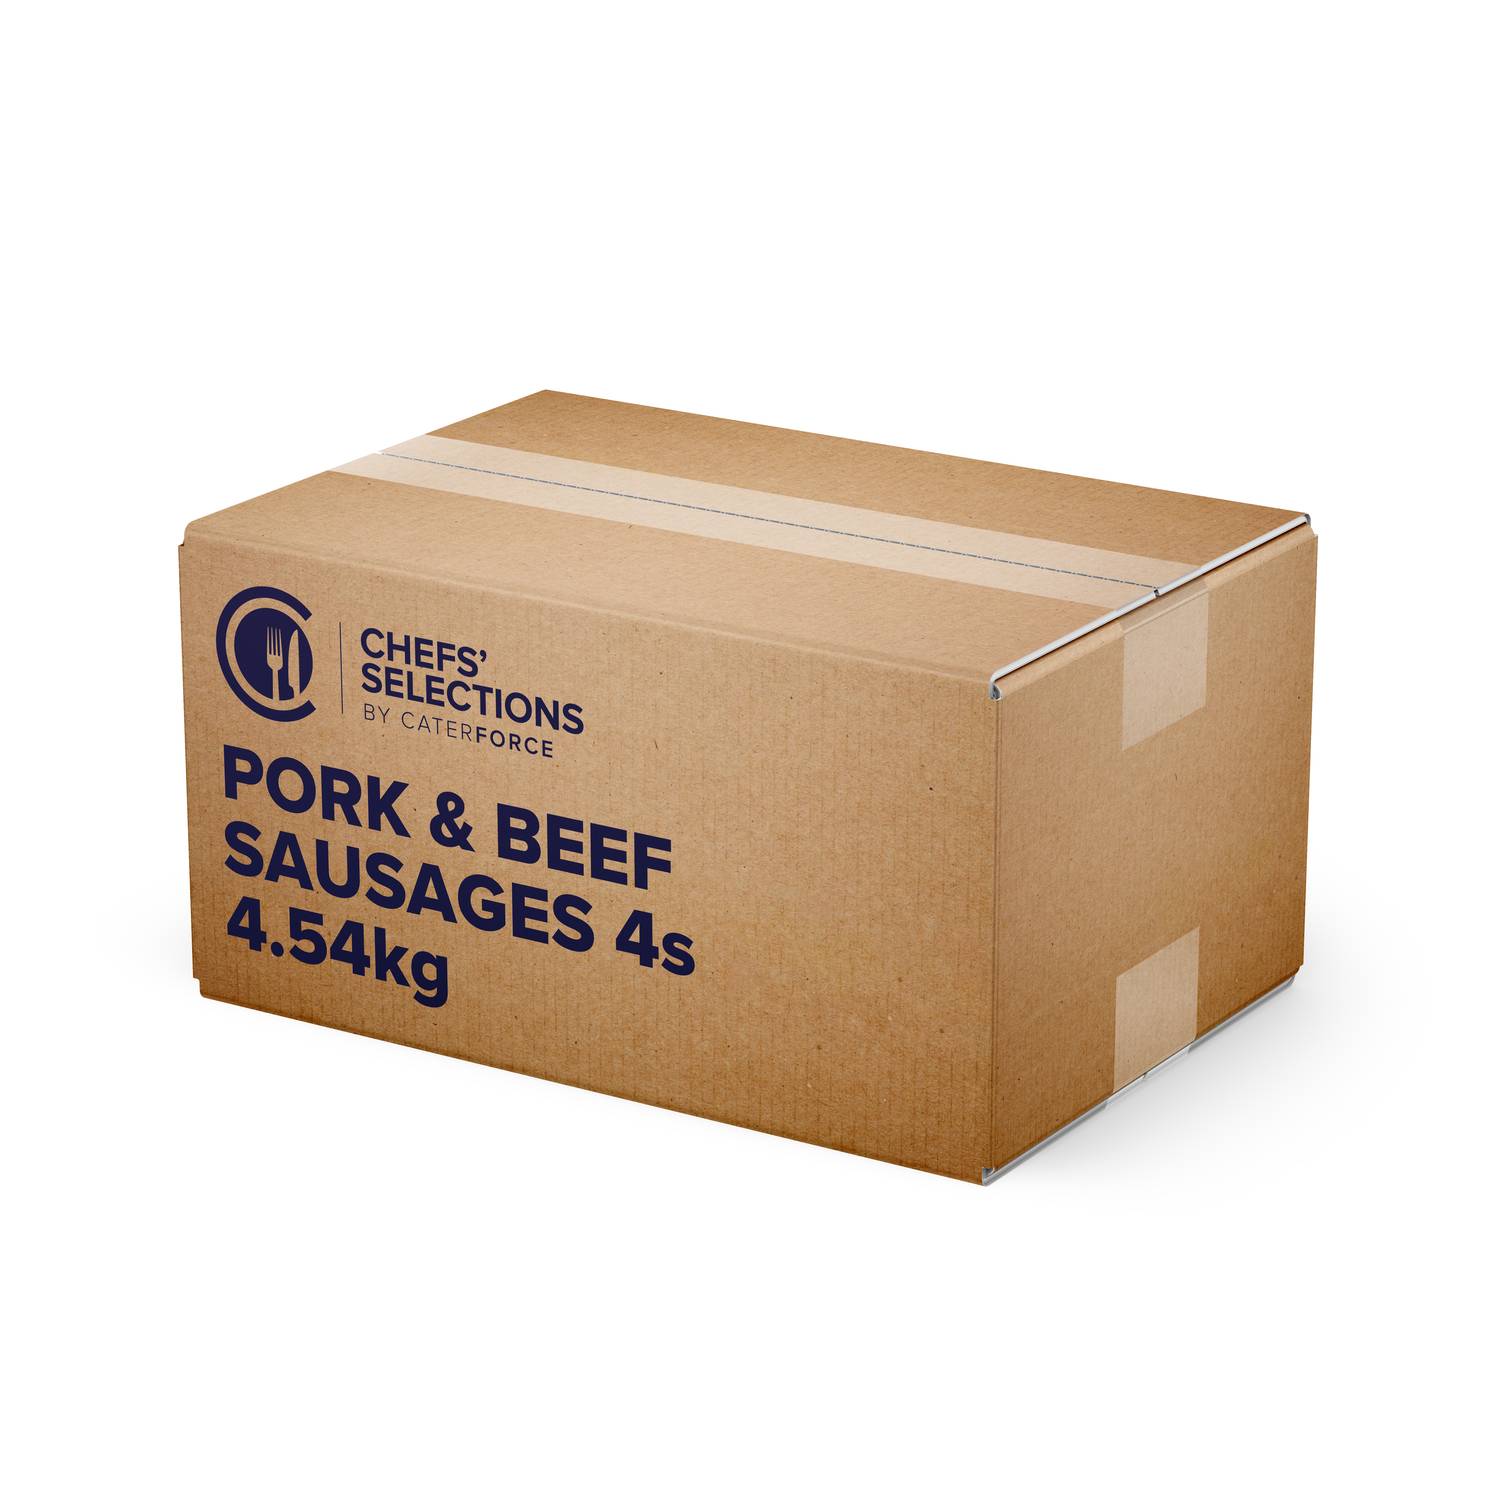 Chefs’ Selections Pork & Beef Sausages 4’s (1 x 4.54kg)